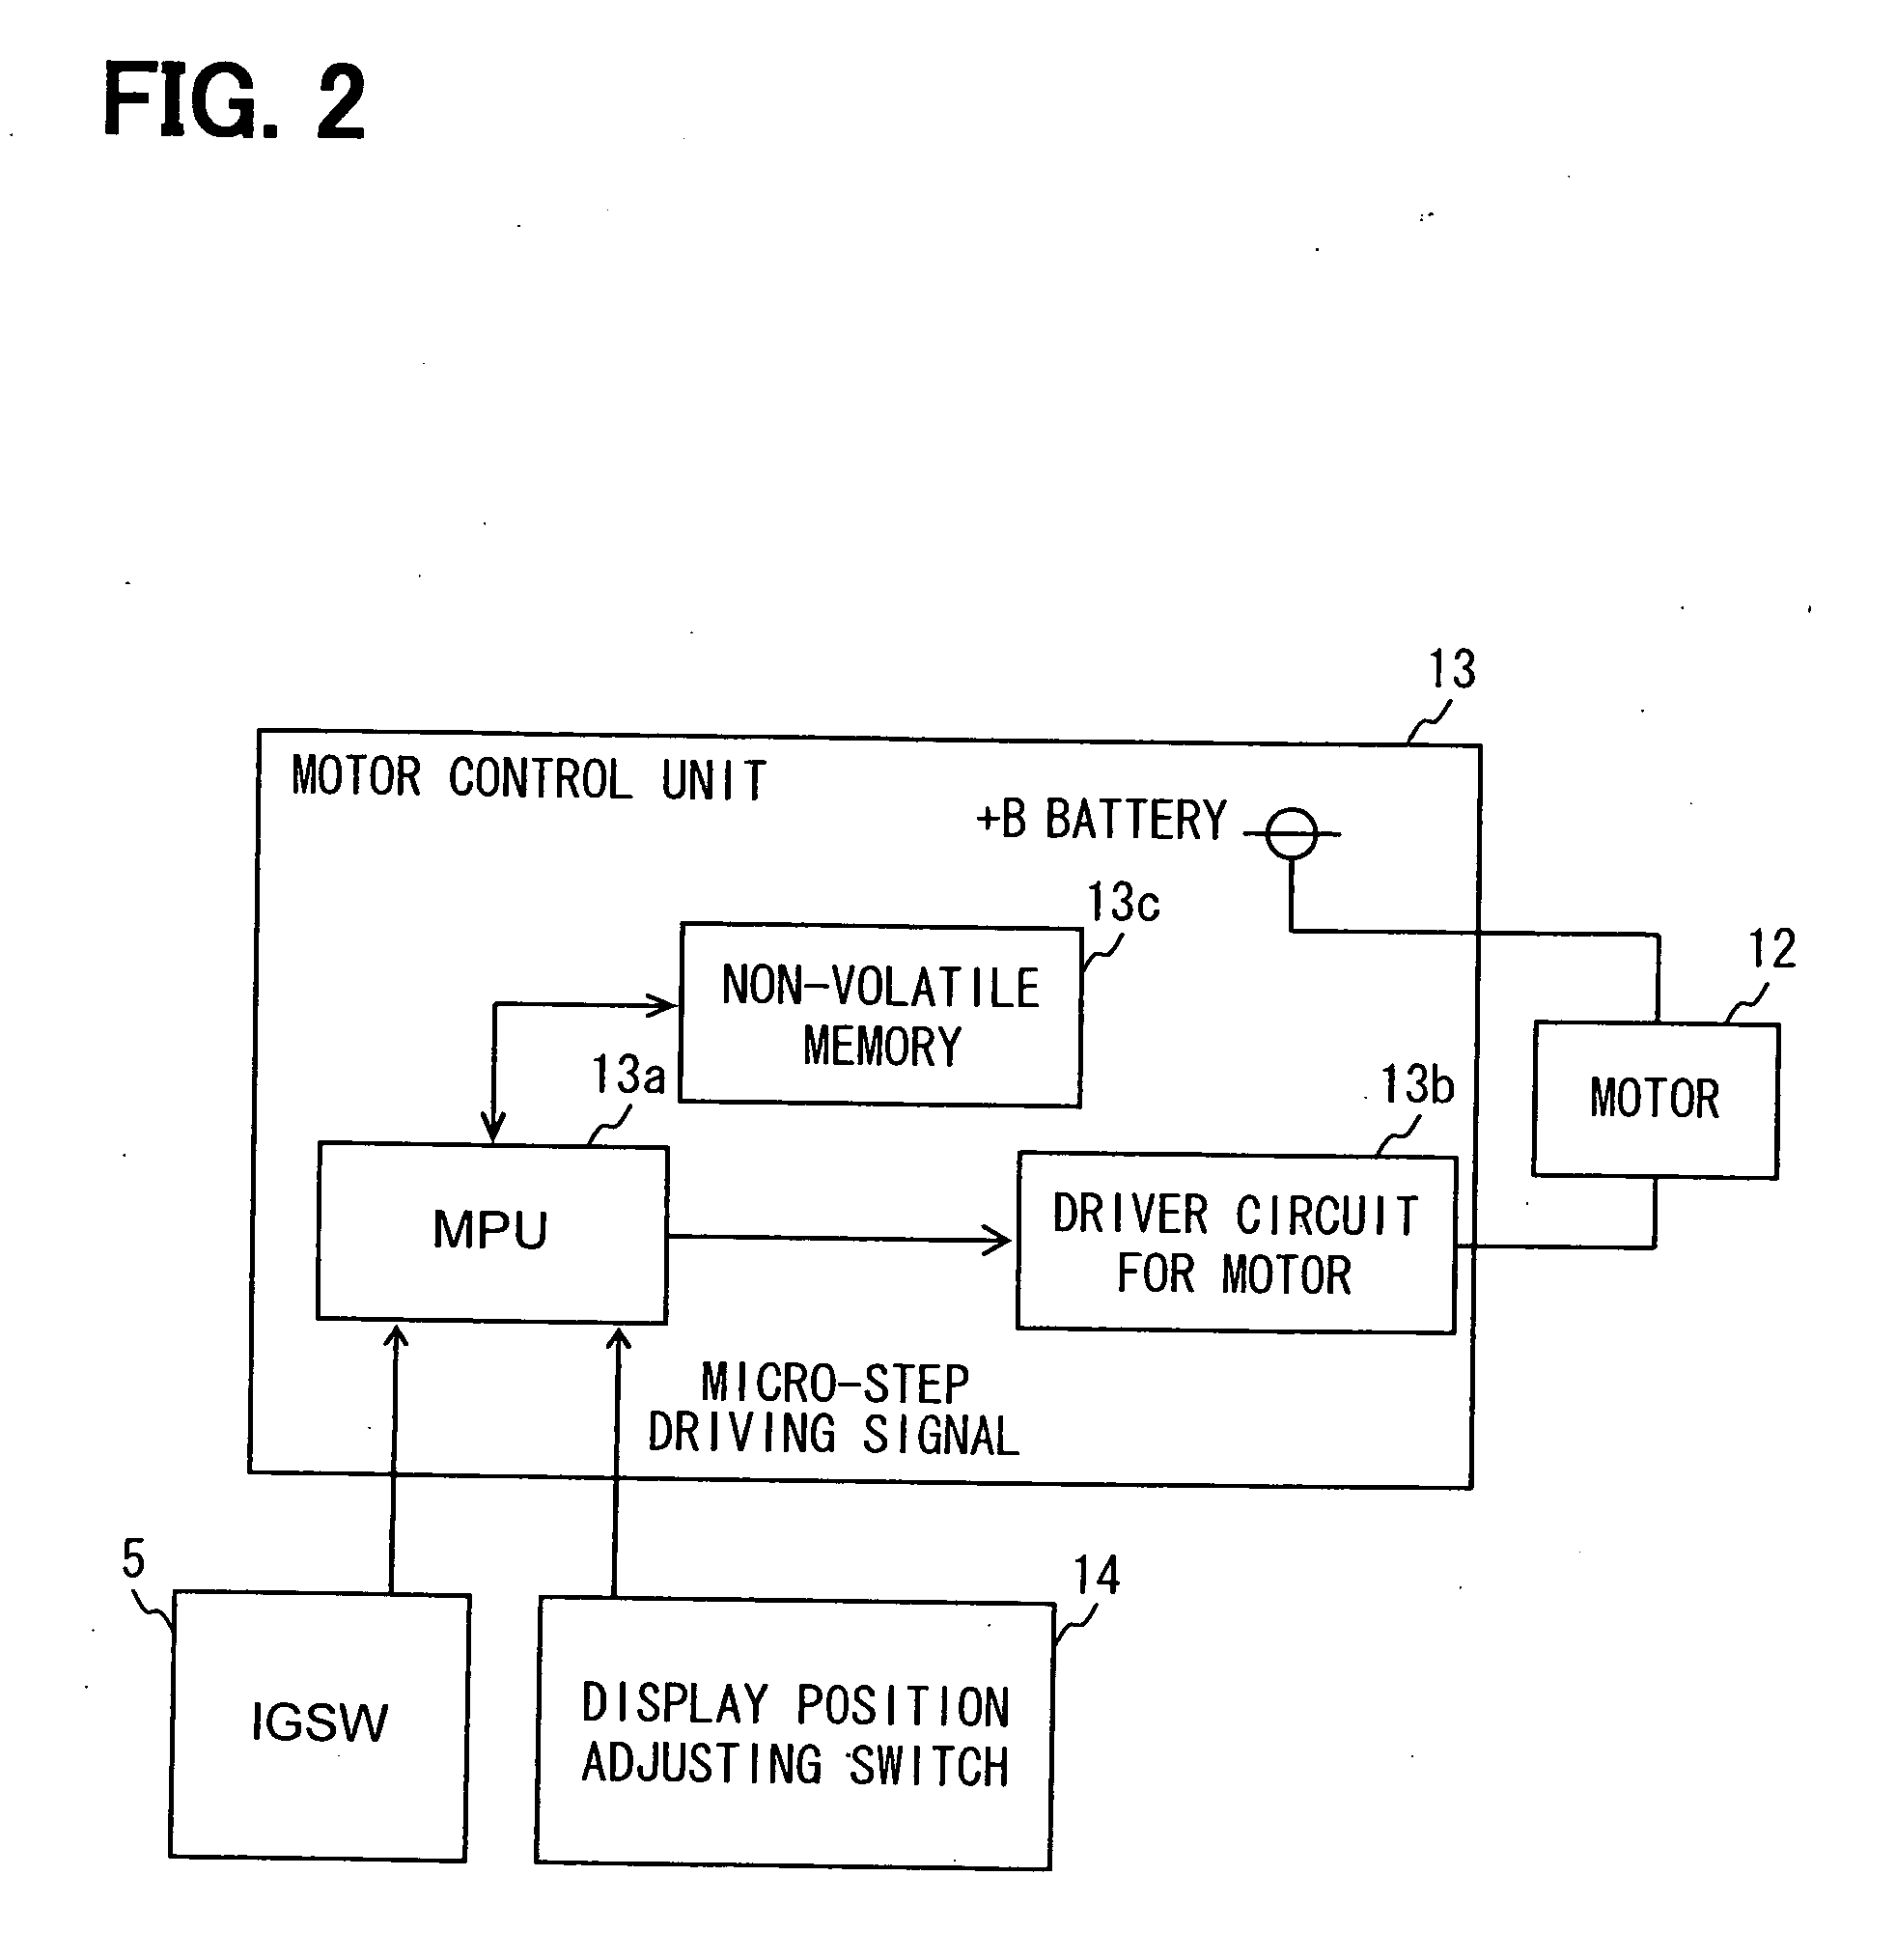 Vehicle display system and motor control device therefor